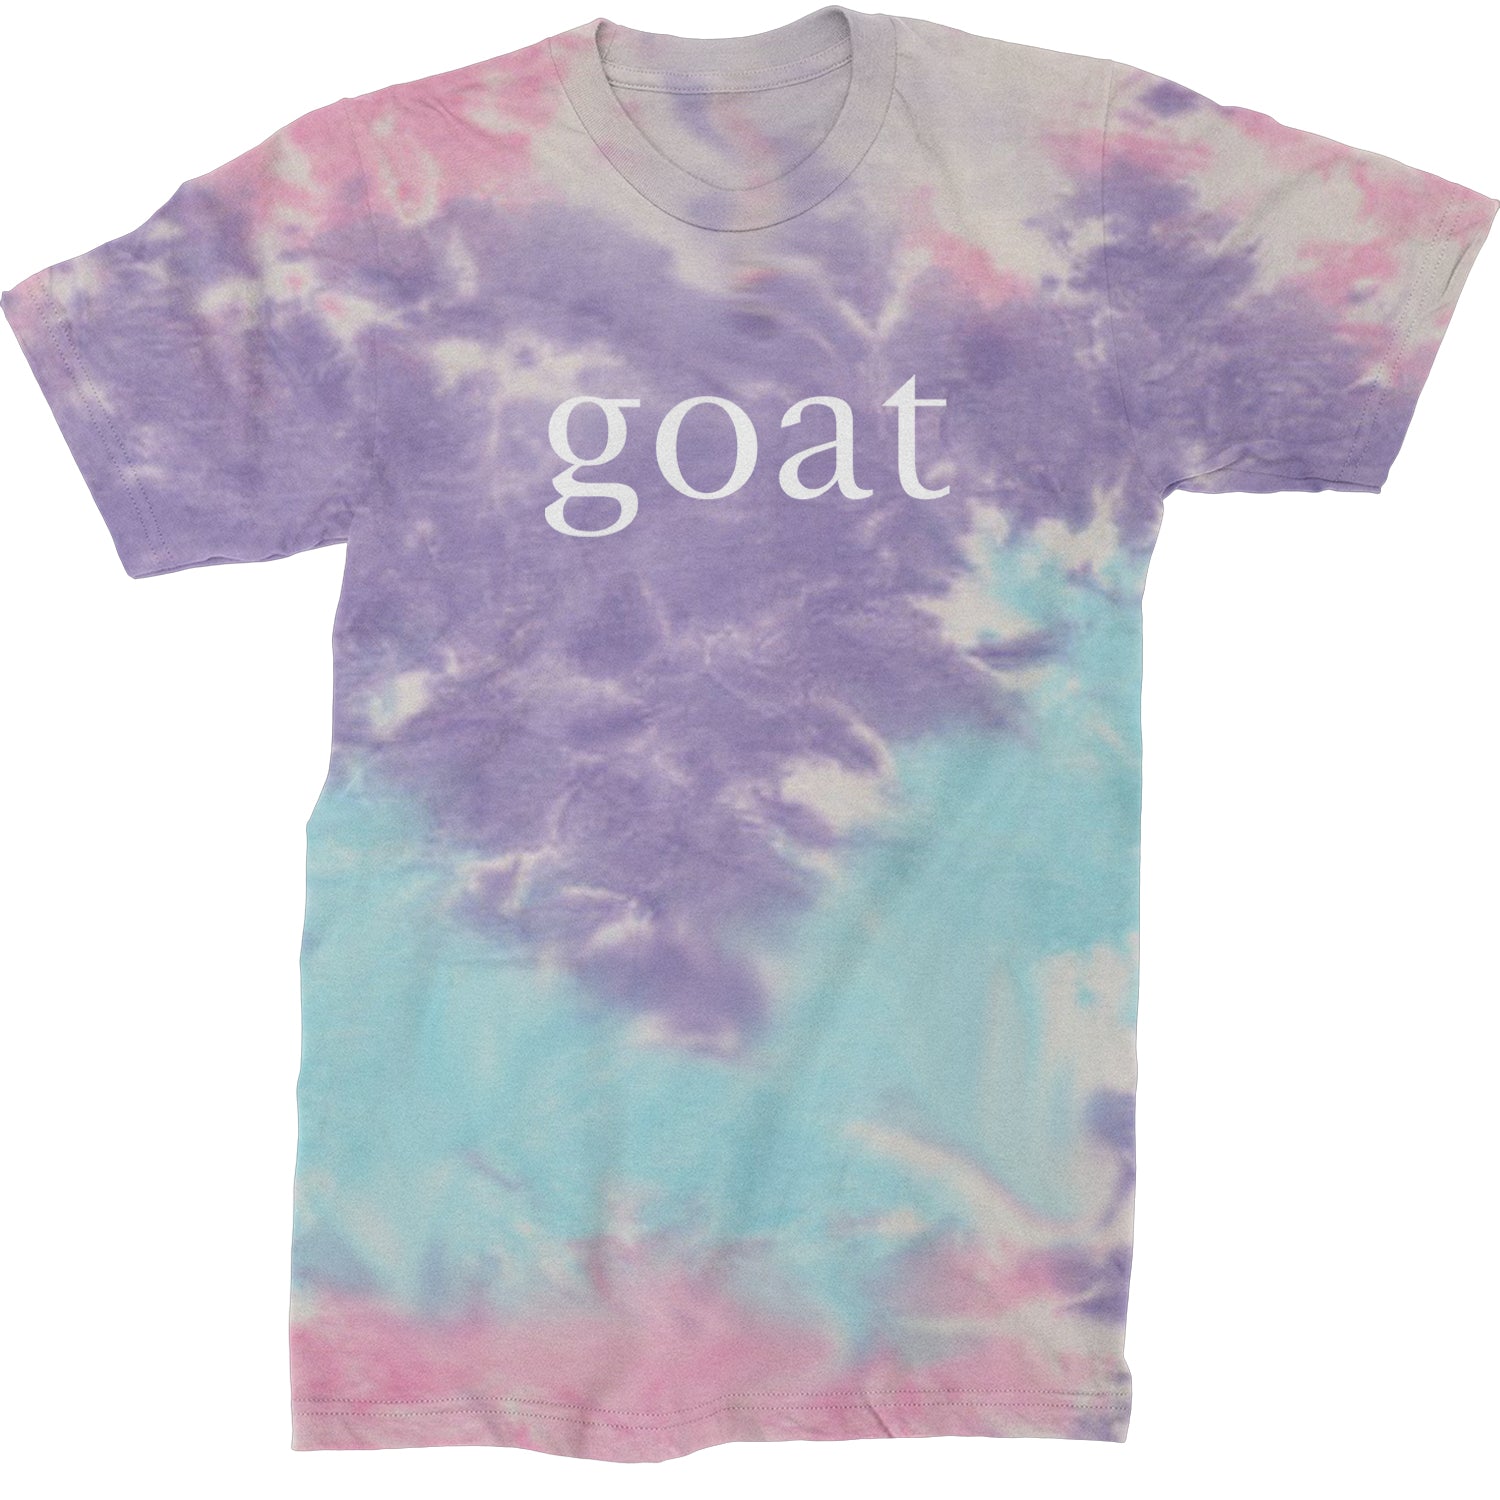 GOAT - Greatest Of All Time  Mens T-shirt Tie-Dye Cotton Candy